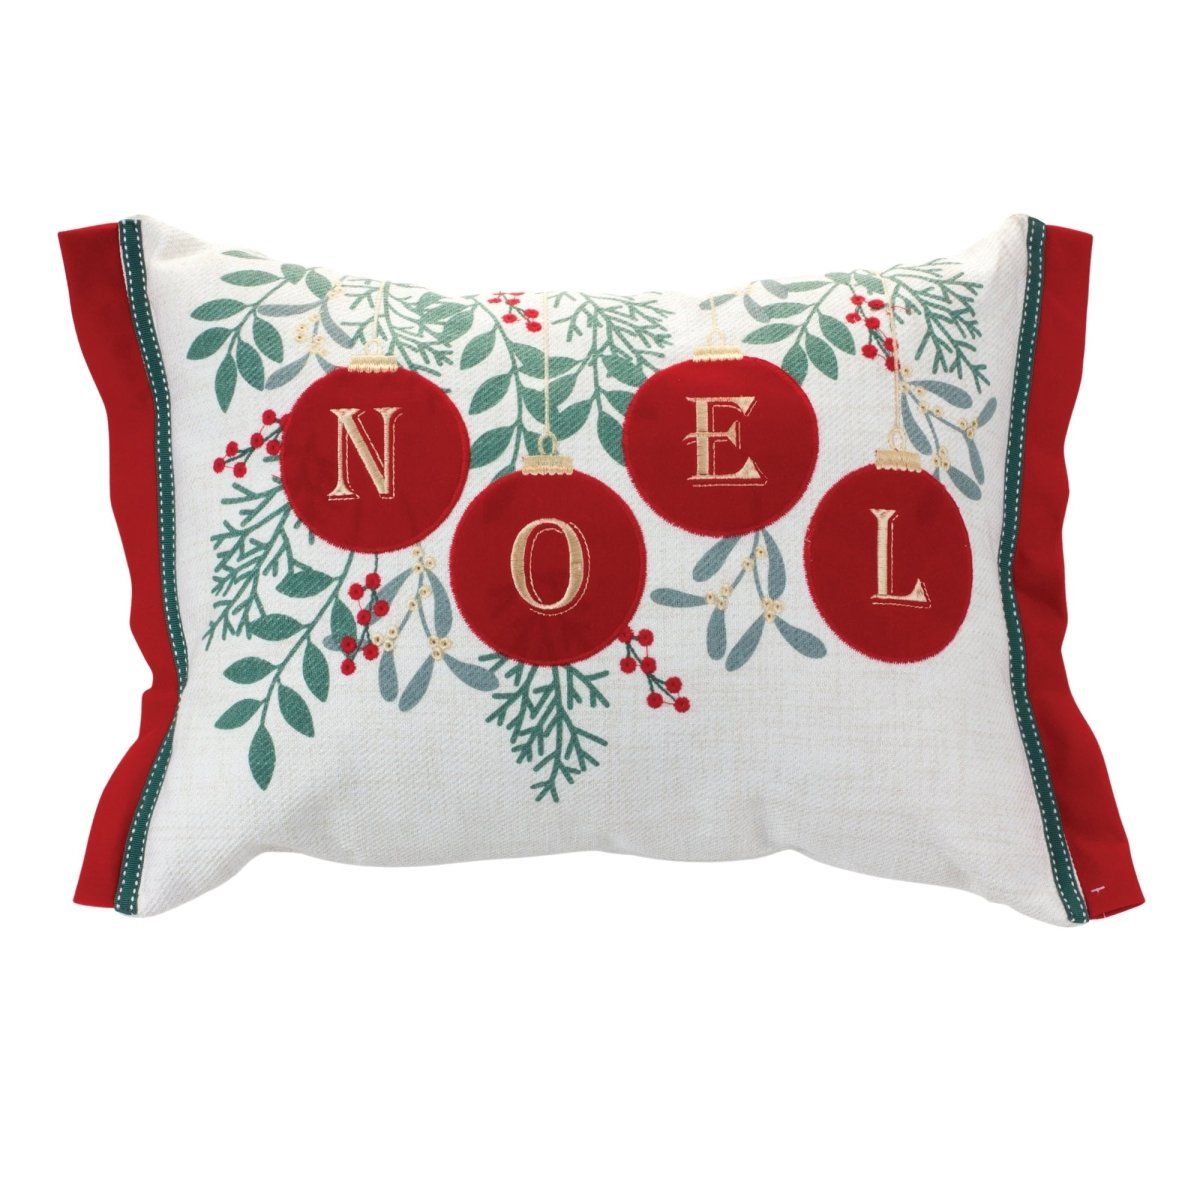 Shop For Noel Ornaments Throw Pillow at Michelle's aDOORable Creations